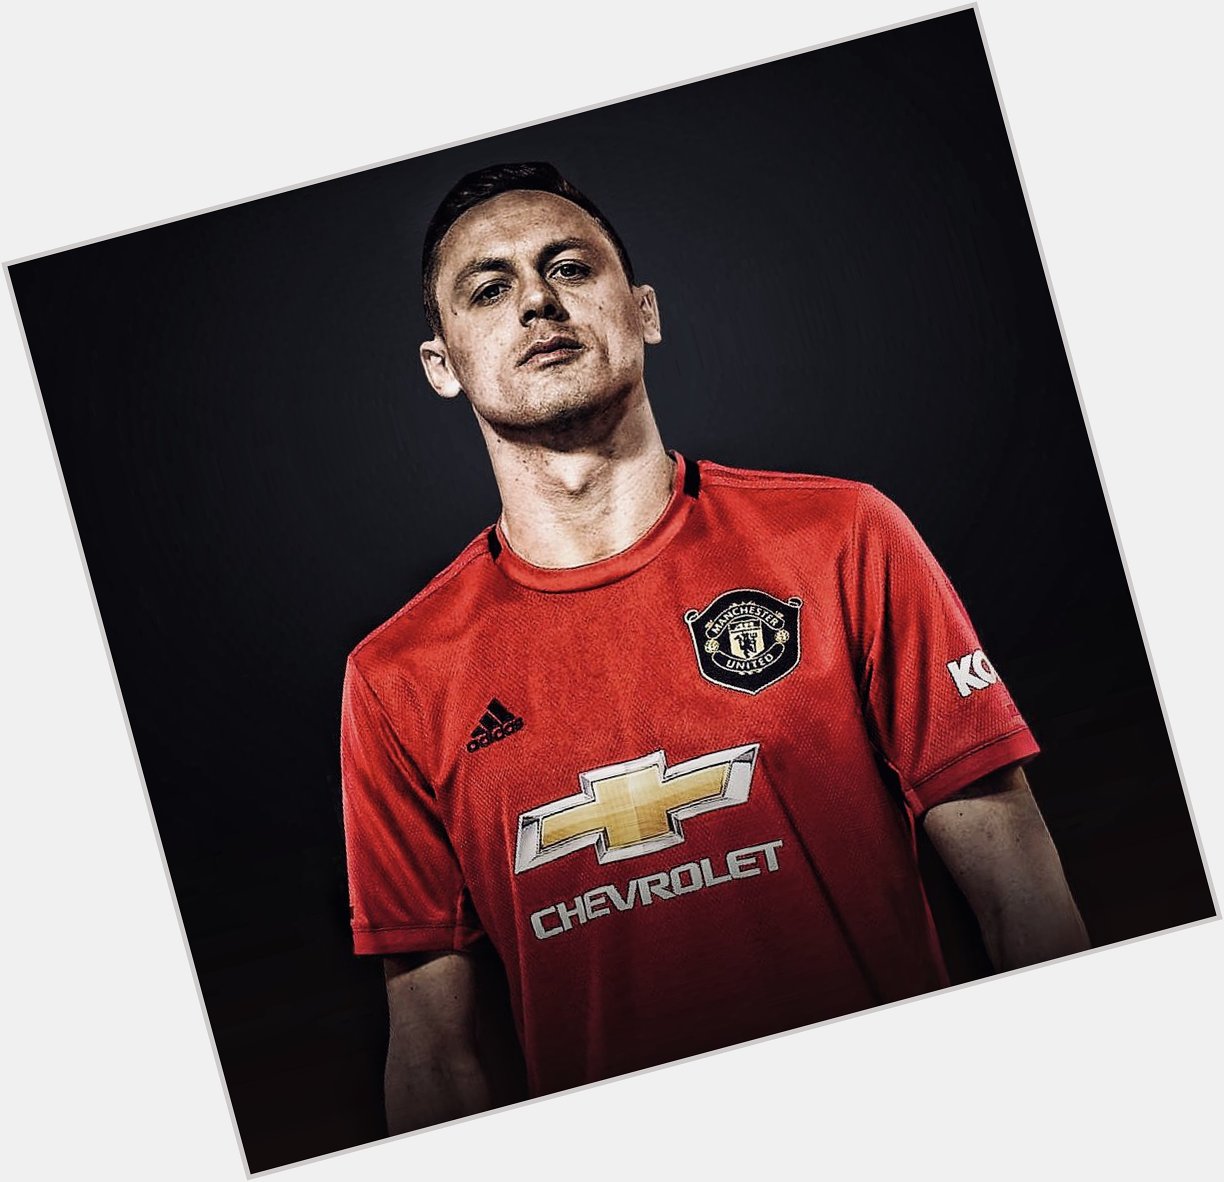 Happy birthday to Nemanja Matic who turns 31 today! How important do you think he will be this season? 